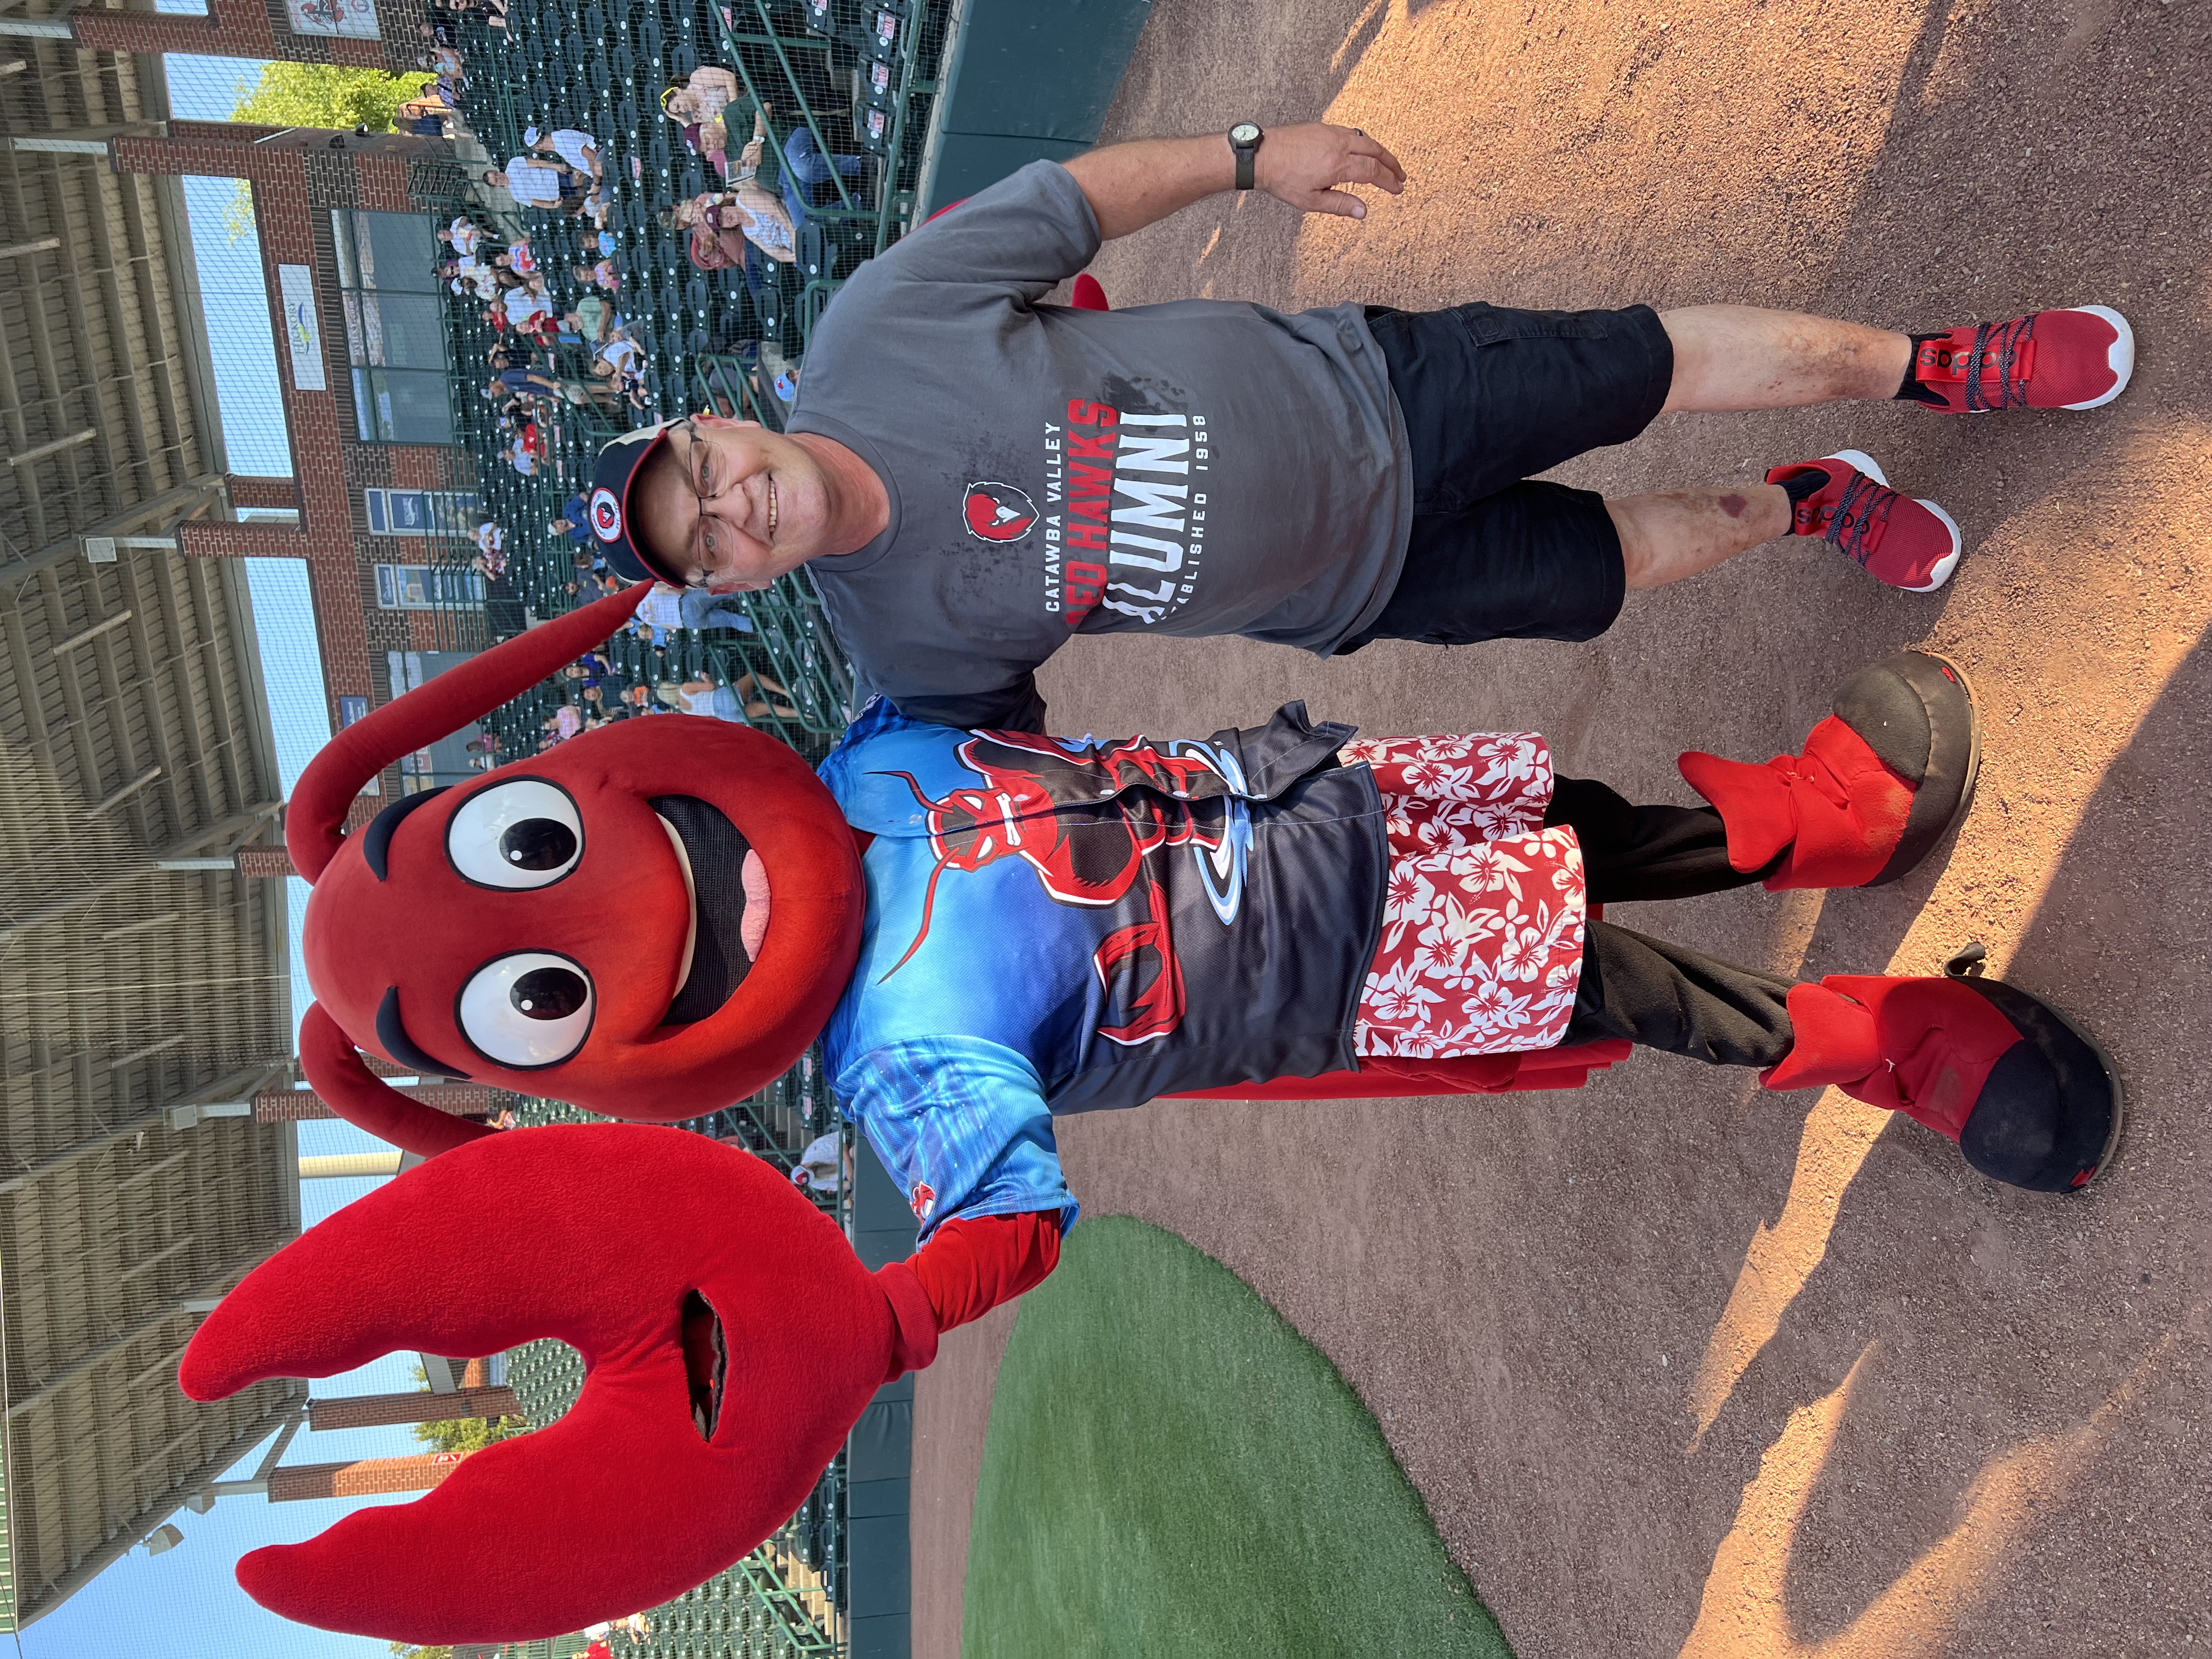 CVCC Alum Johnny Hull ('21) stands with Crawdad's Mascot after giving the first pitch.